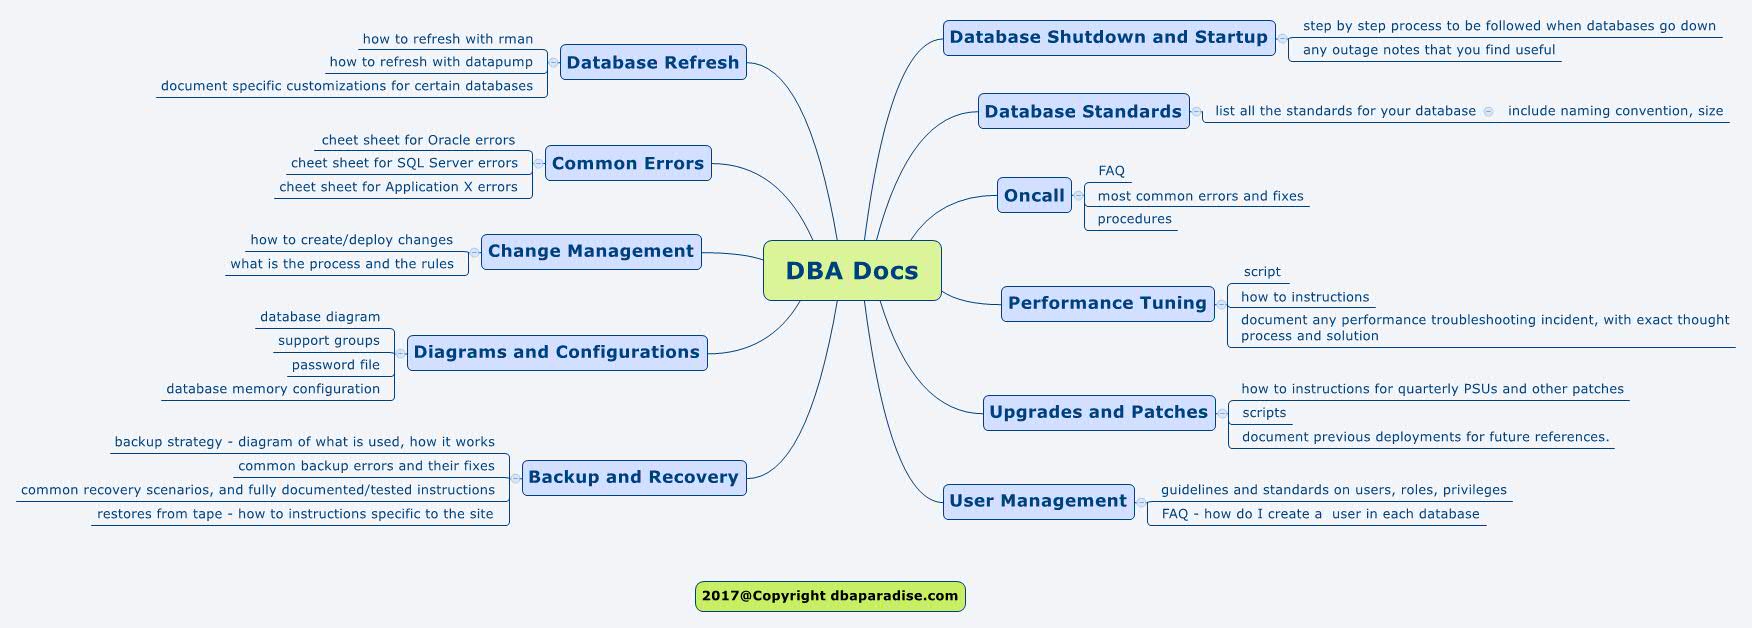 DBA Documentation-3 Most Common Questions Answered: Why,Where,What